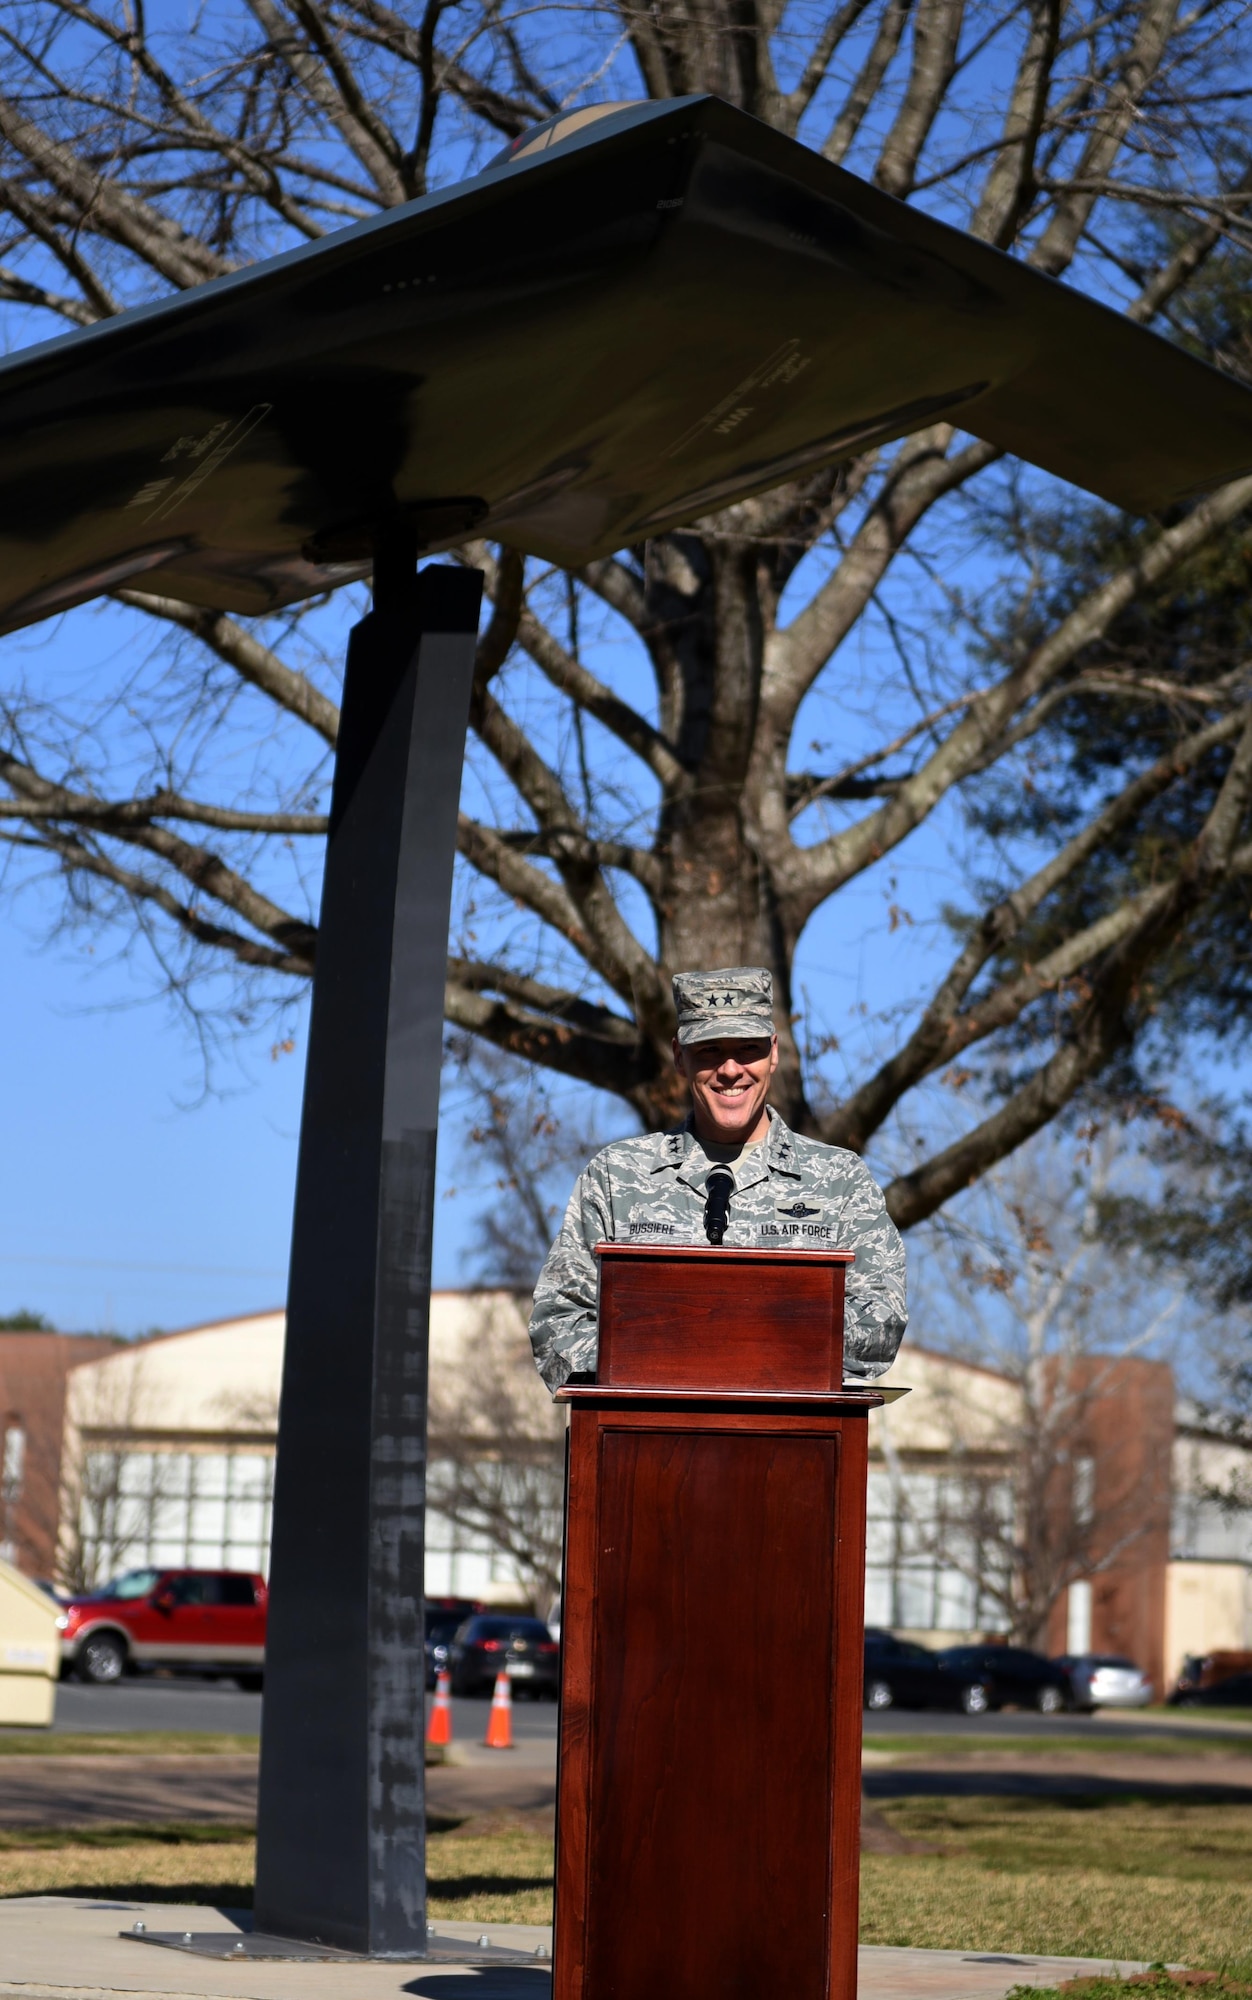 Maj. Gen. Thomas Bussiere, 8th Air Force commander, speaks during a building dedication and cake cutting ceremony at Barksdale Air Force Base, La., Feb. 2, 2017. The 8th AF headquarters building was dedicated to General James H. “Jimmy” Doolittle as part of the Eighth’s 75th diamond anniversary events. (U.S. Air Force photo by Senior Airman Erin Trower)